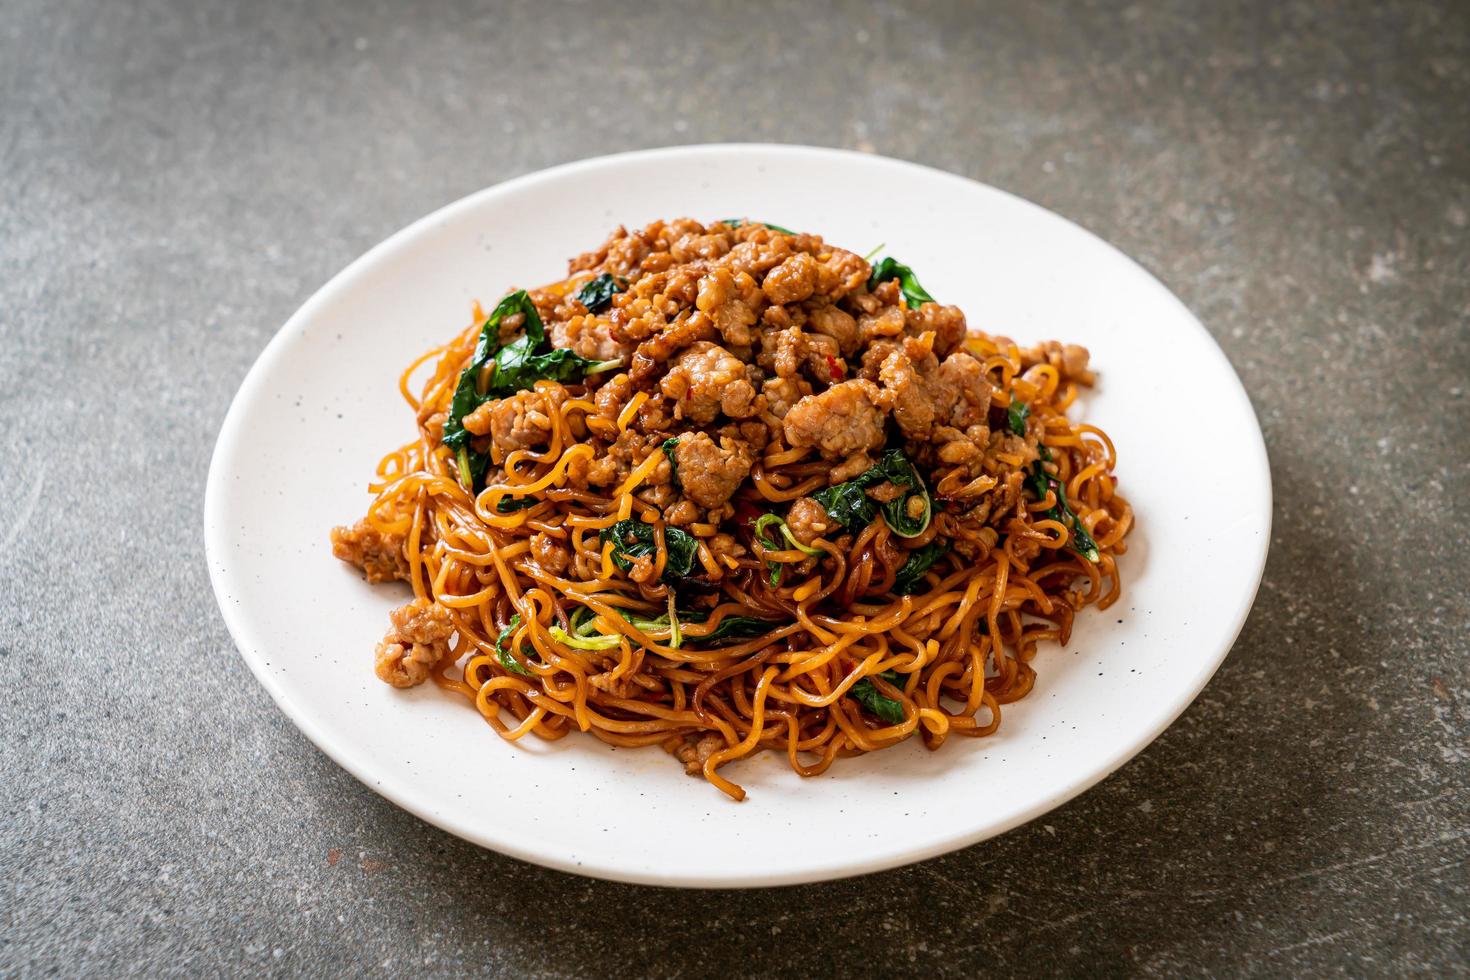 Stir-fried instant noodles with Thai basil and minced pork - Asian food style photo